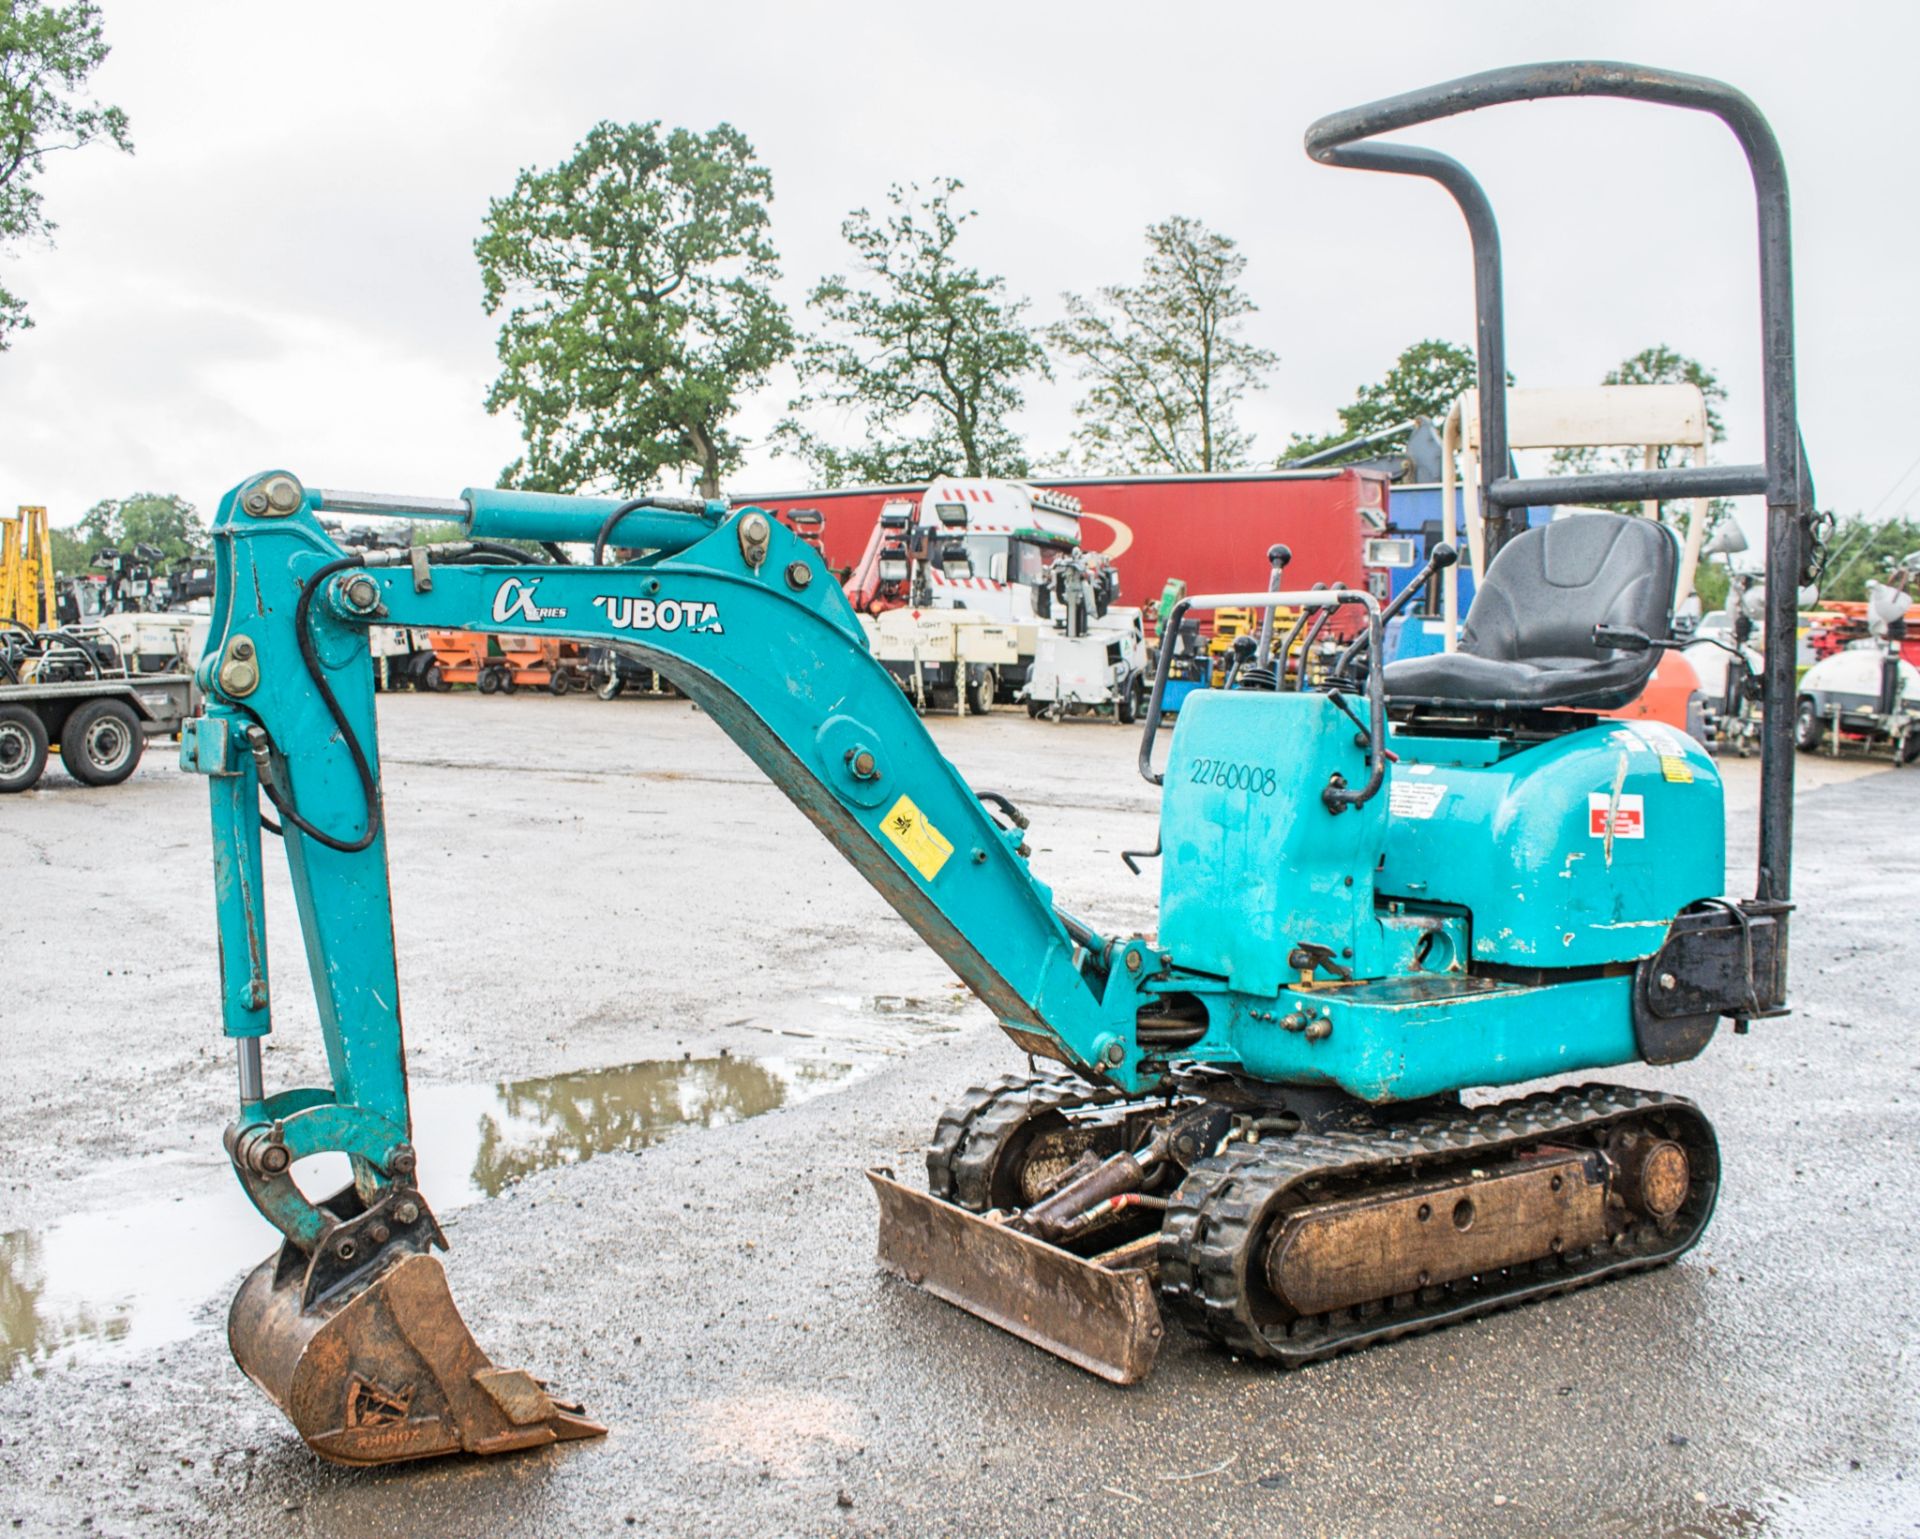 Kubota K008 0.8 tonne rubber tracked excavator Year: S/N: Recorded Hours: 3423 blade, expandable